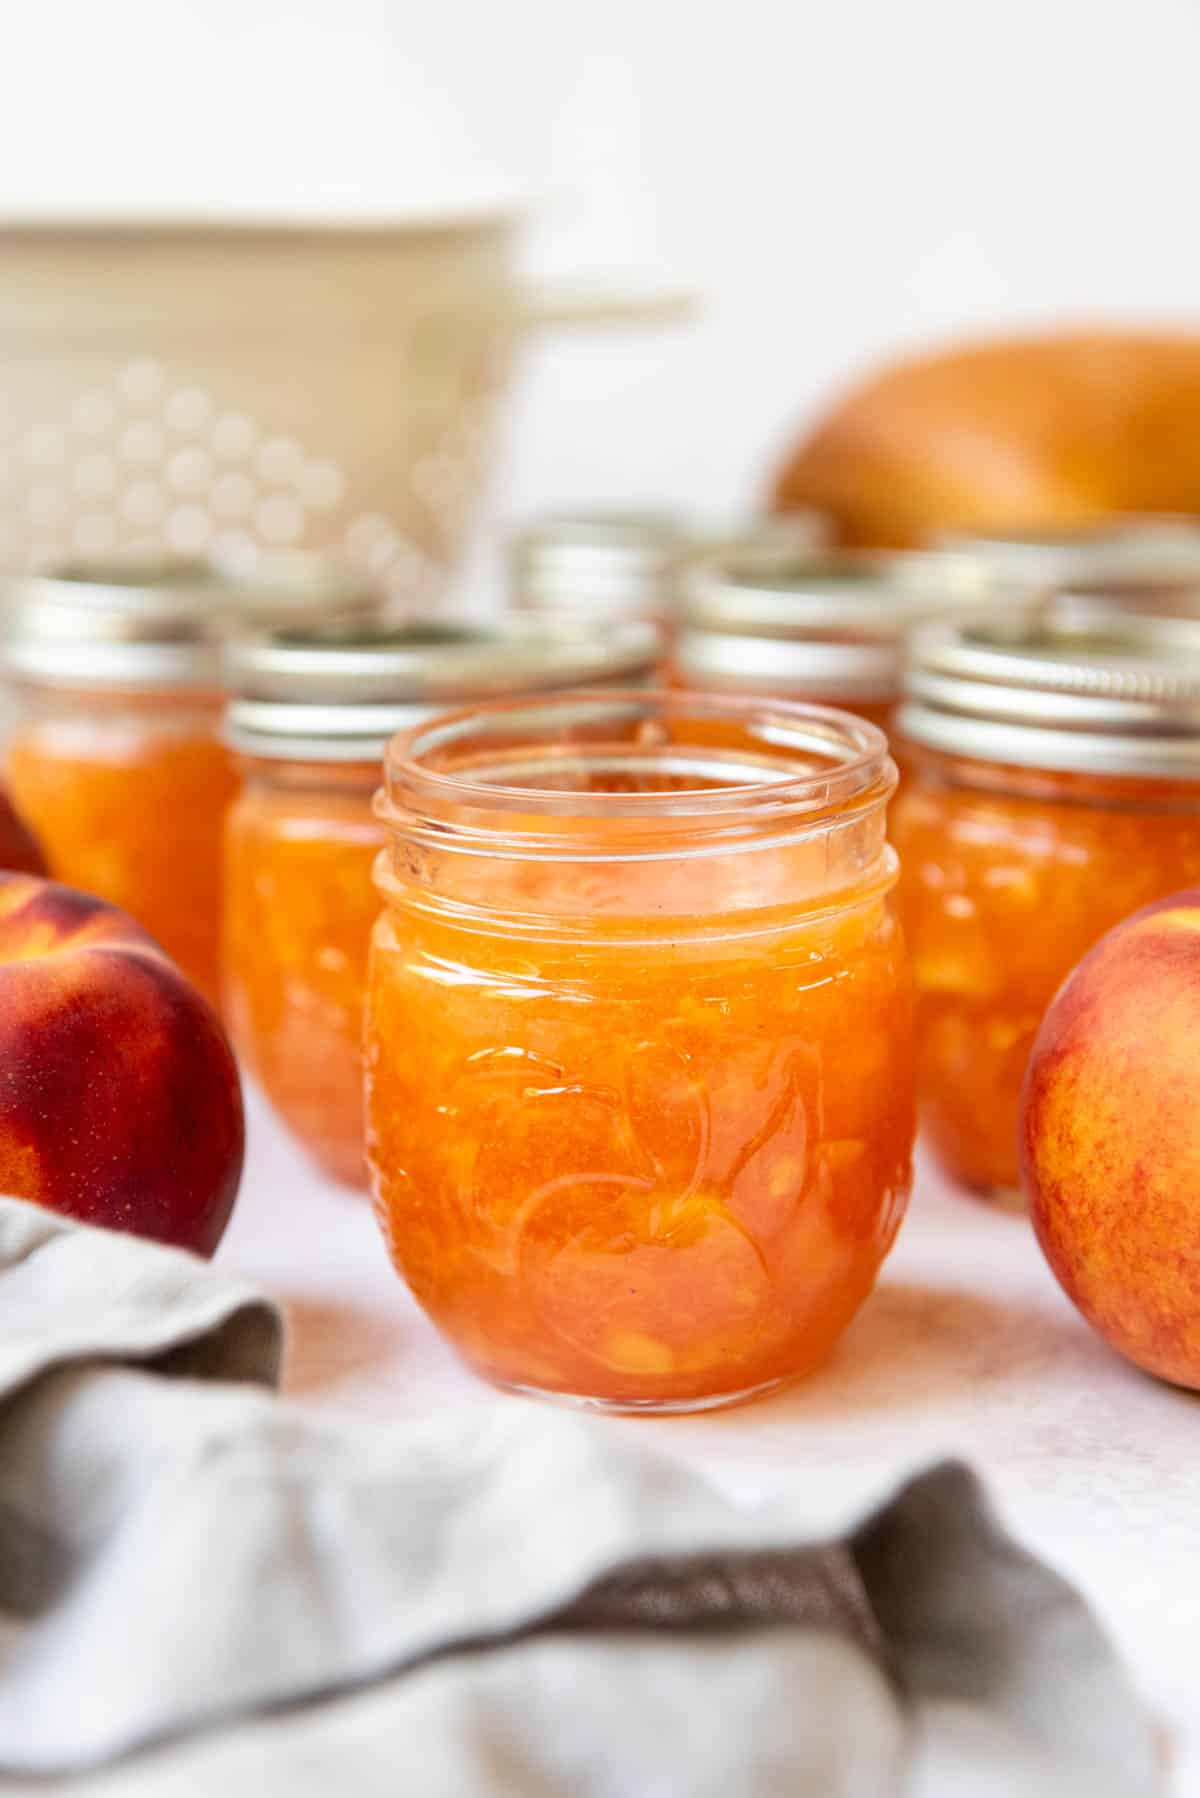 Jars of peach jam with the front jar opened.